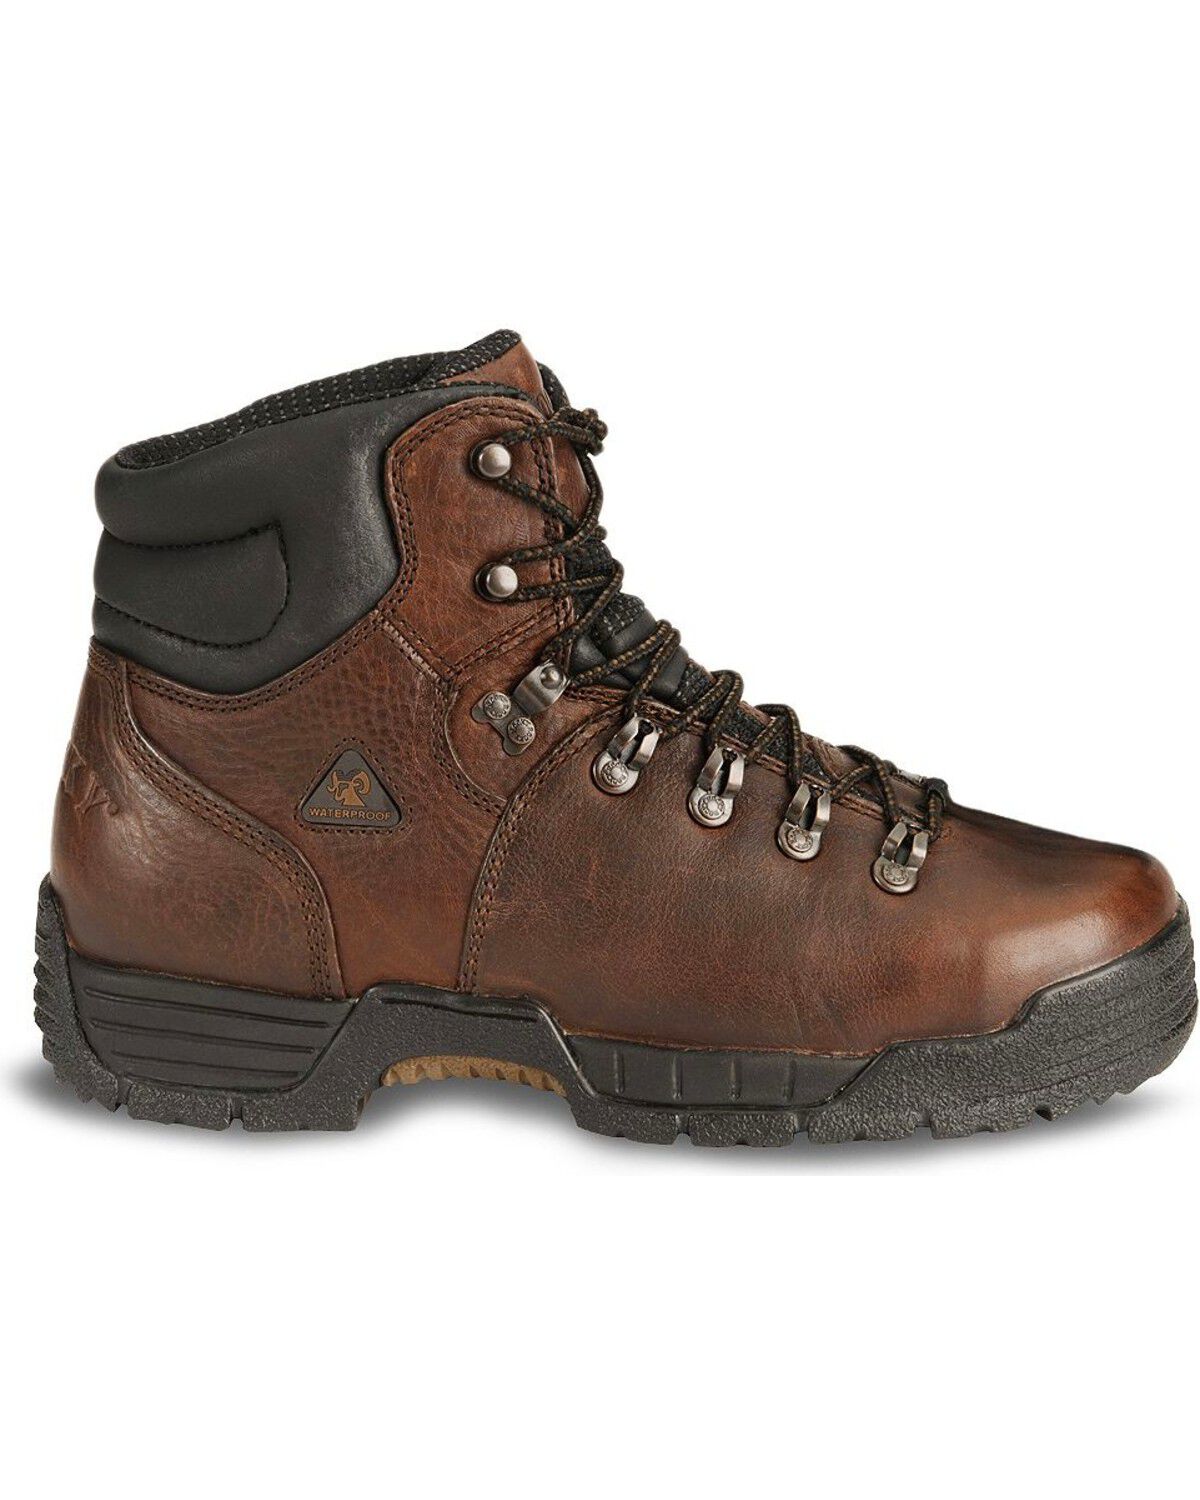 Mobilite Steel Toe Hiking Boots 